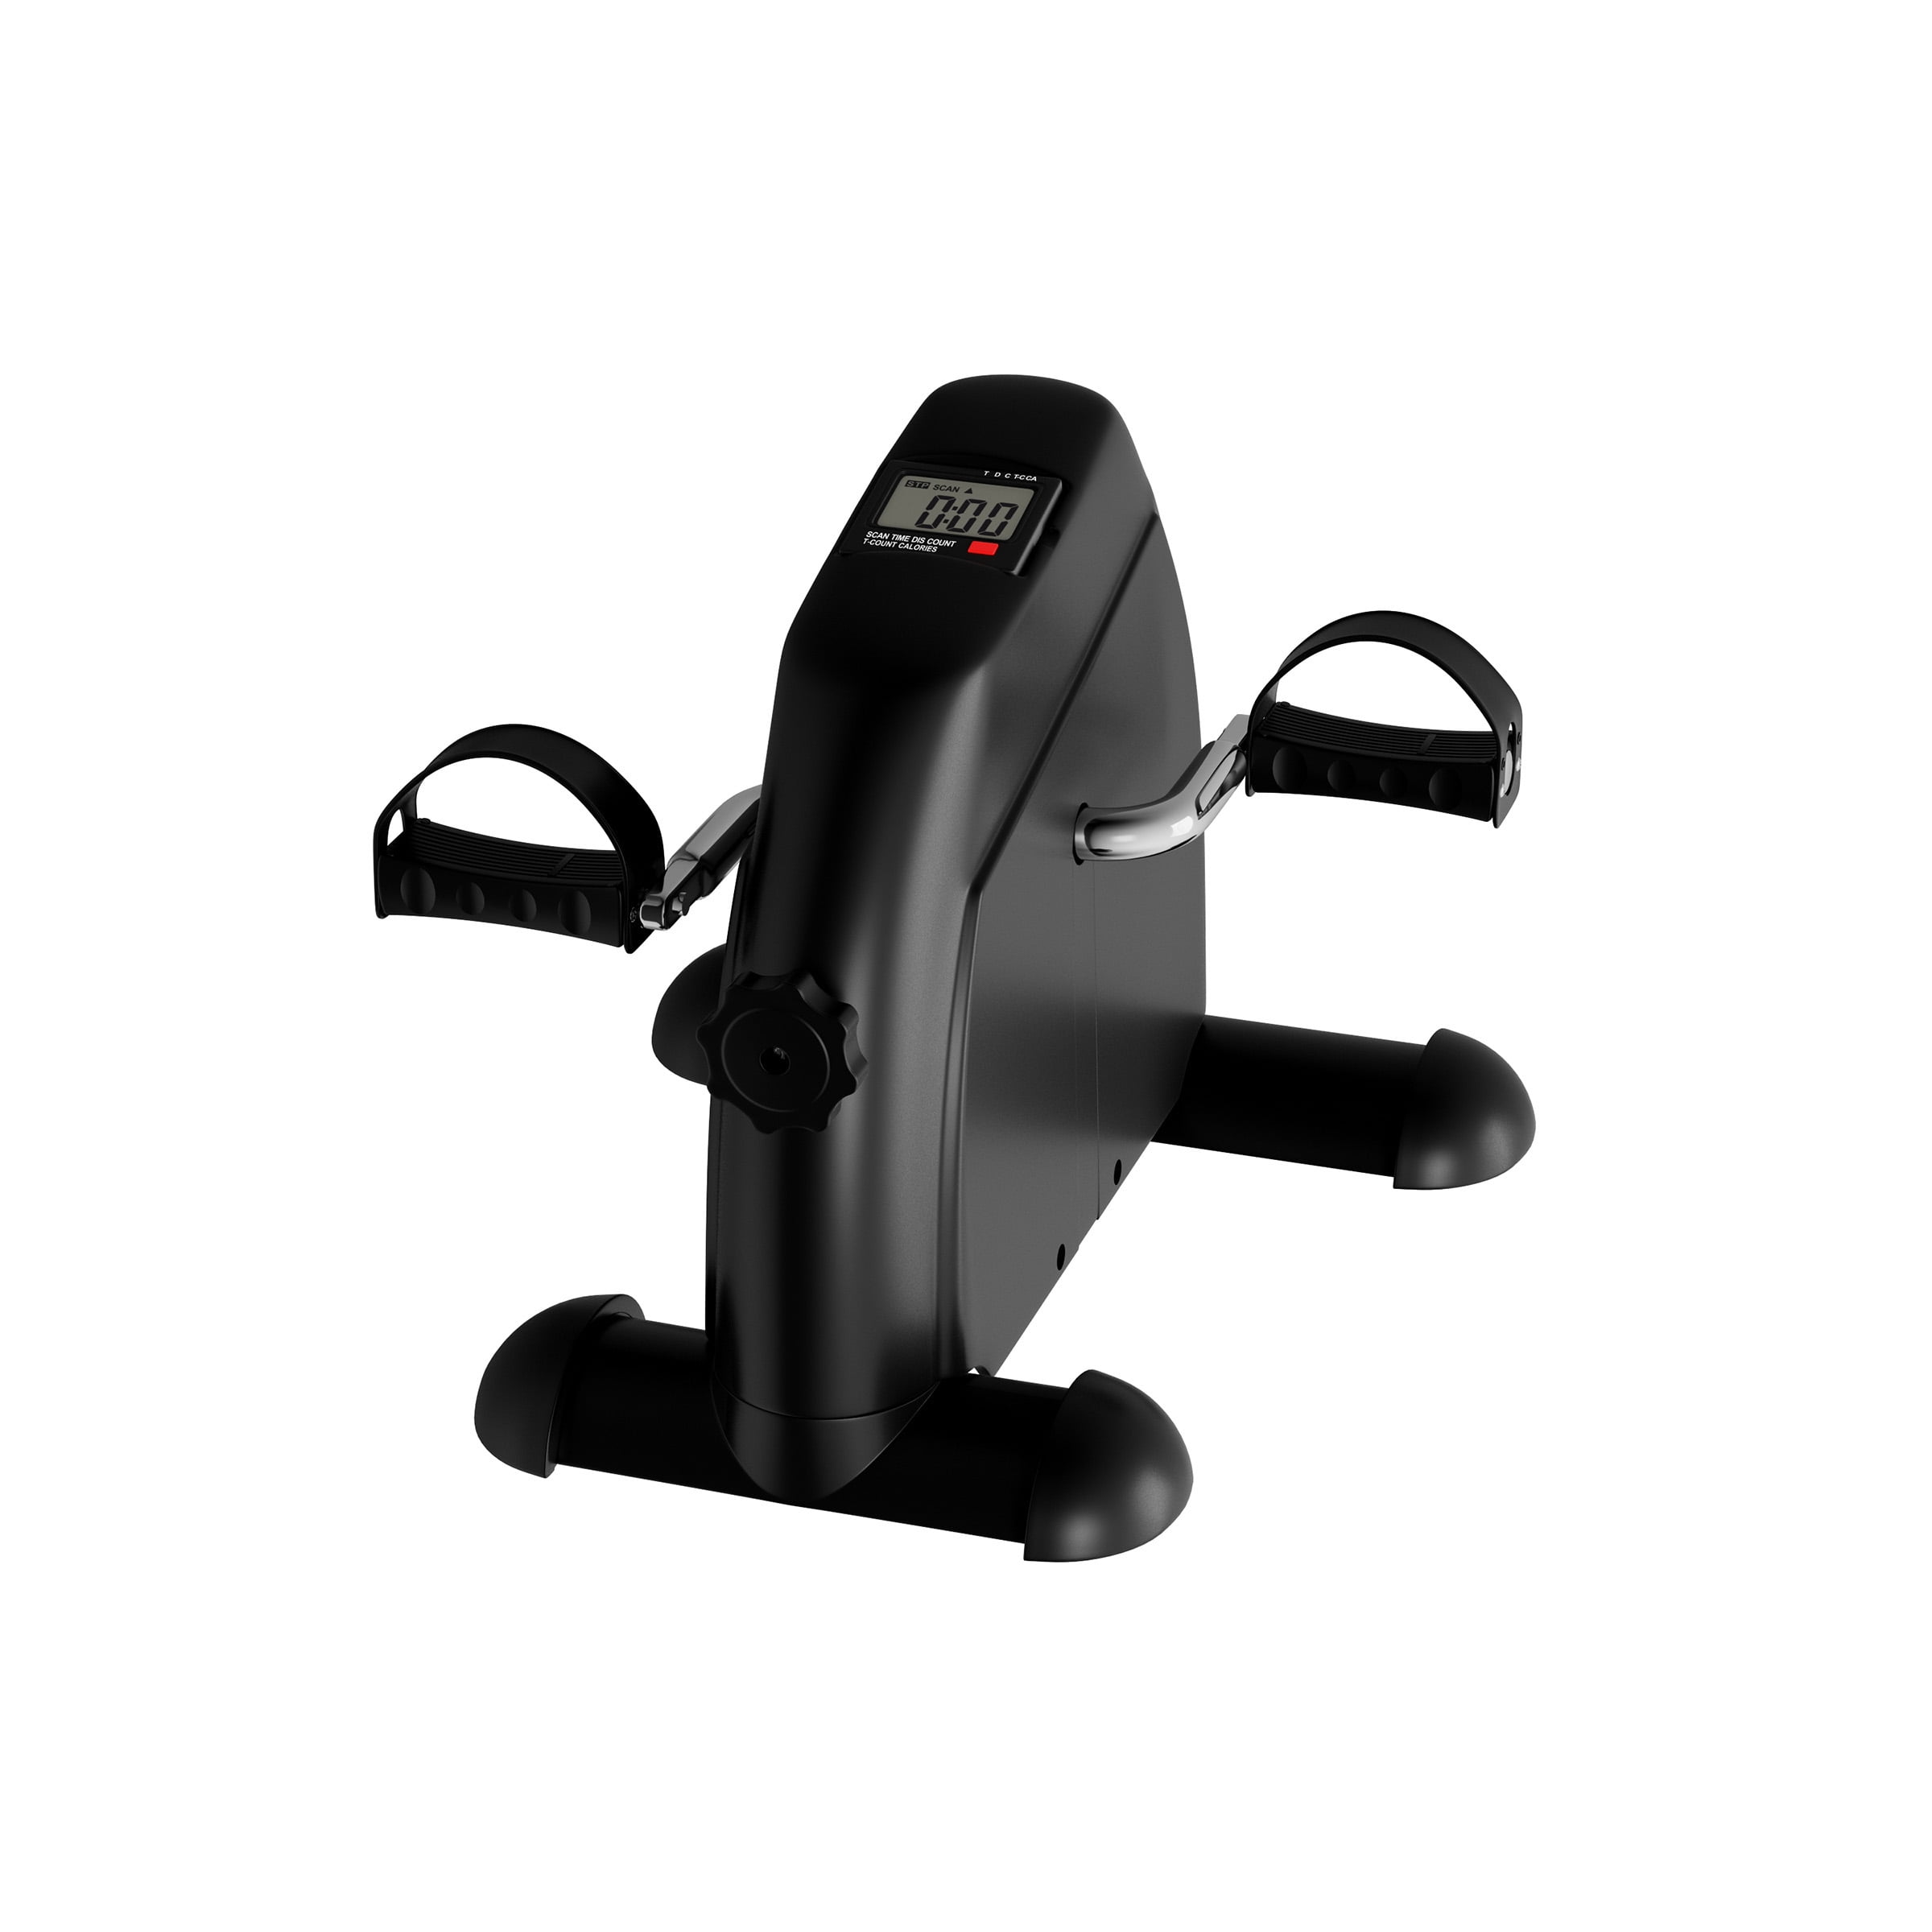 Cuerpo feo Pensamiento Wakeman Fitness Under Desk Bike and Pedal Exerciser with Calorie Counter -  Walmart.com